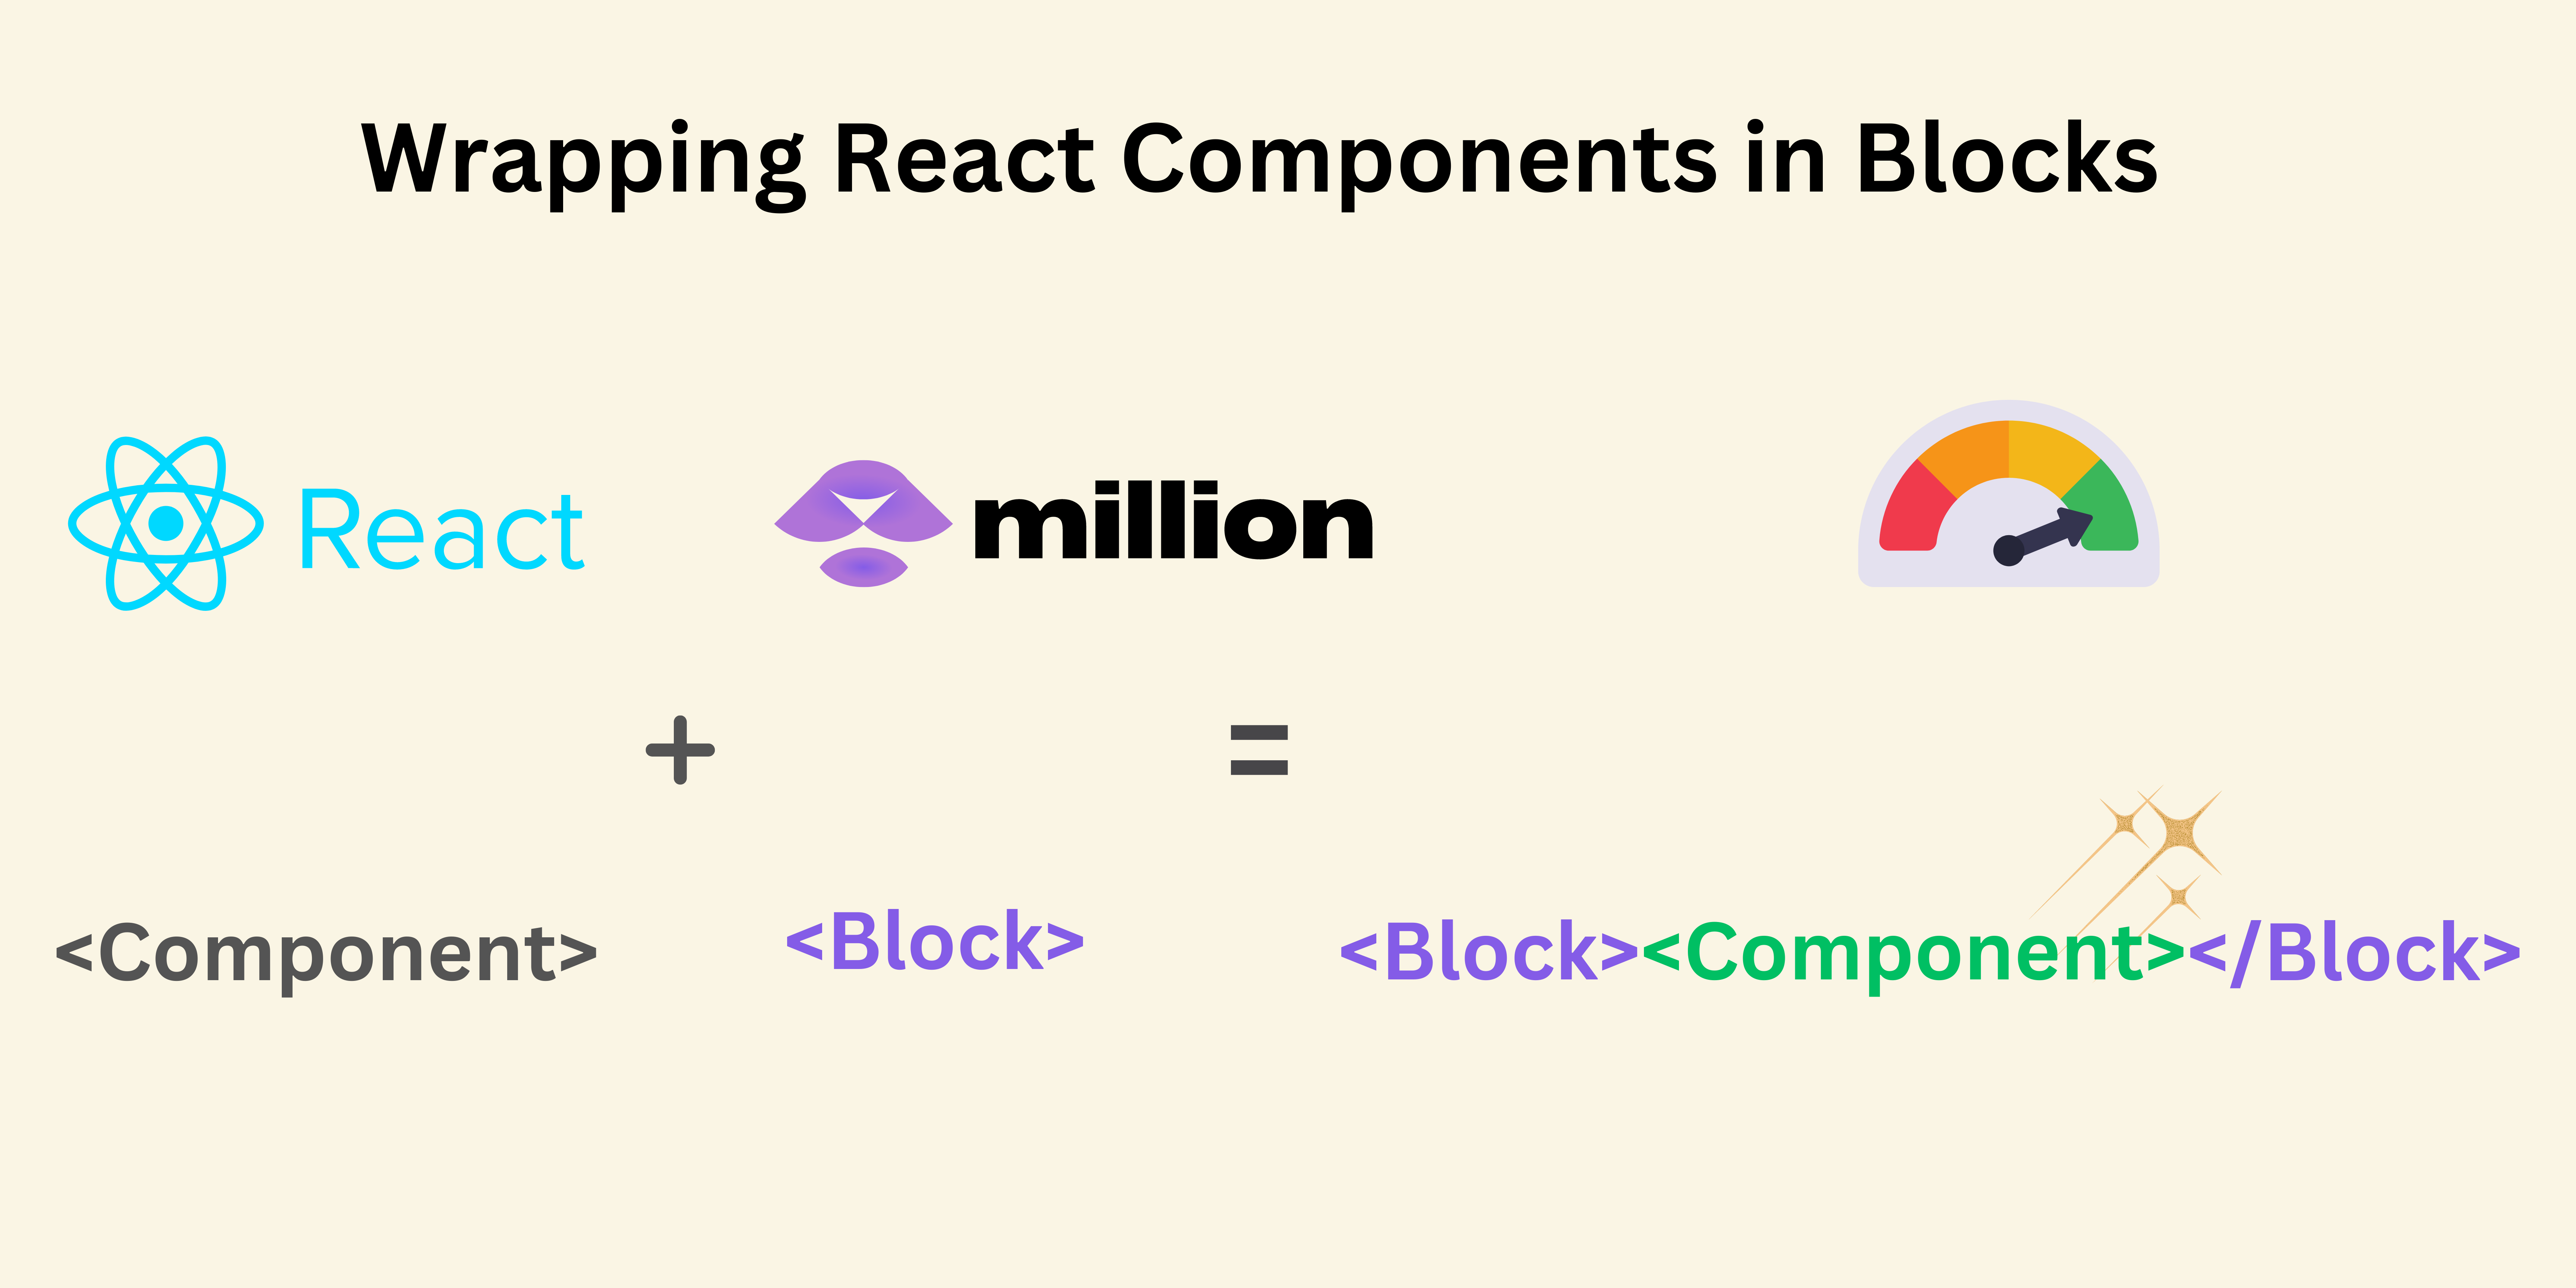 Wrapping React Components in Blocks